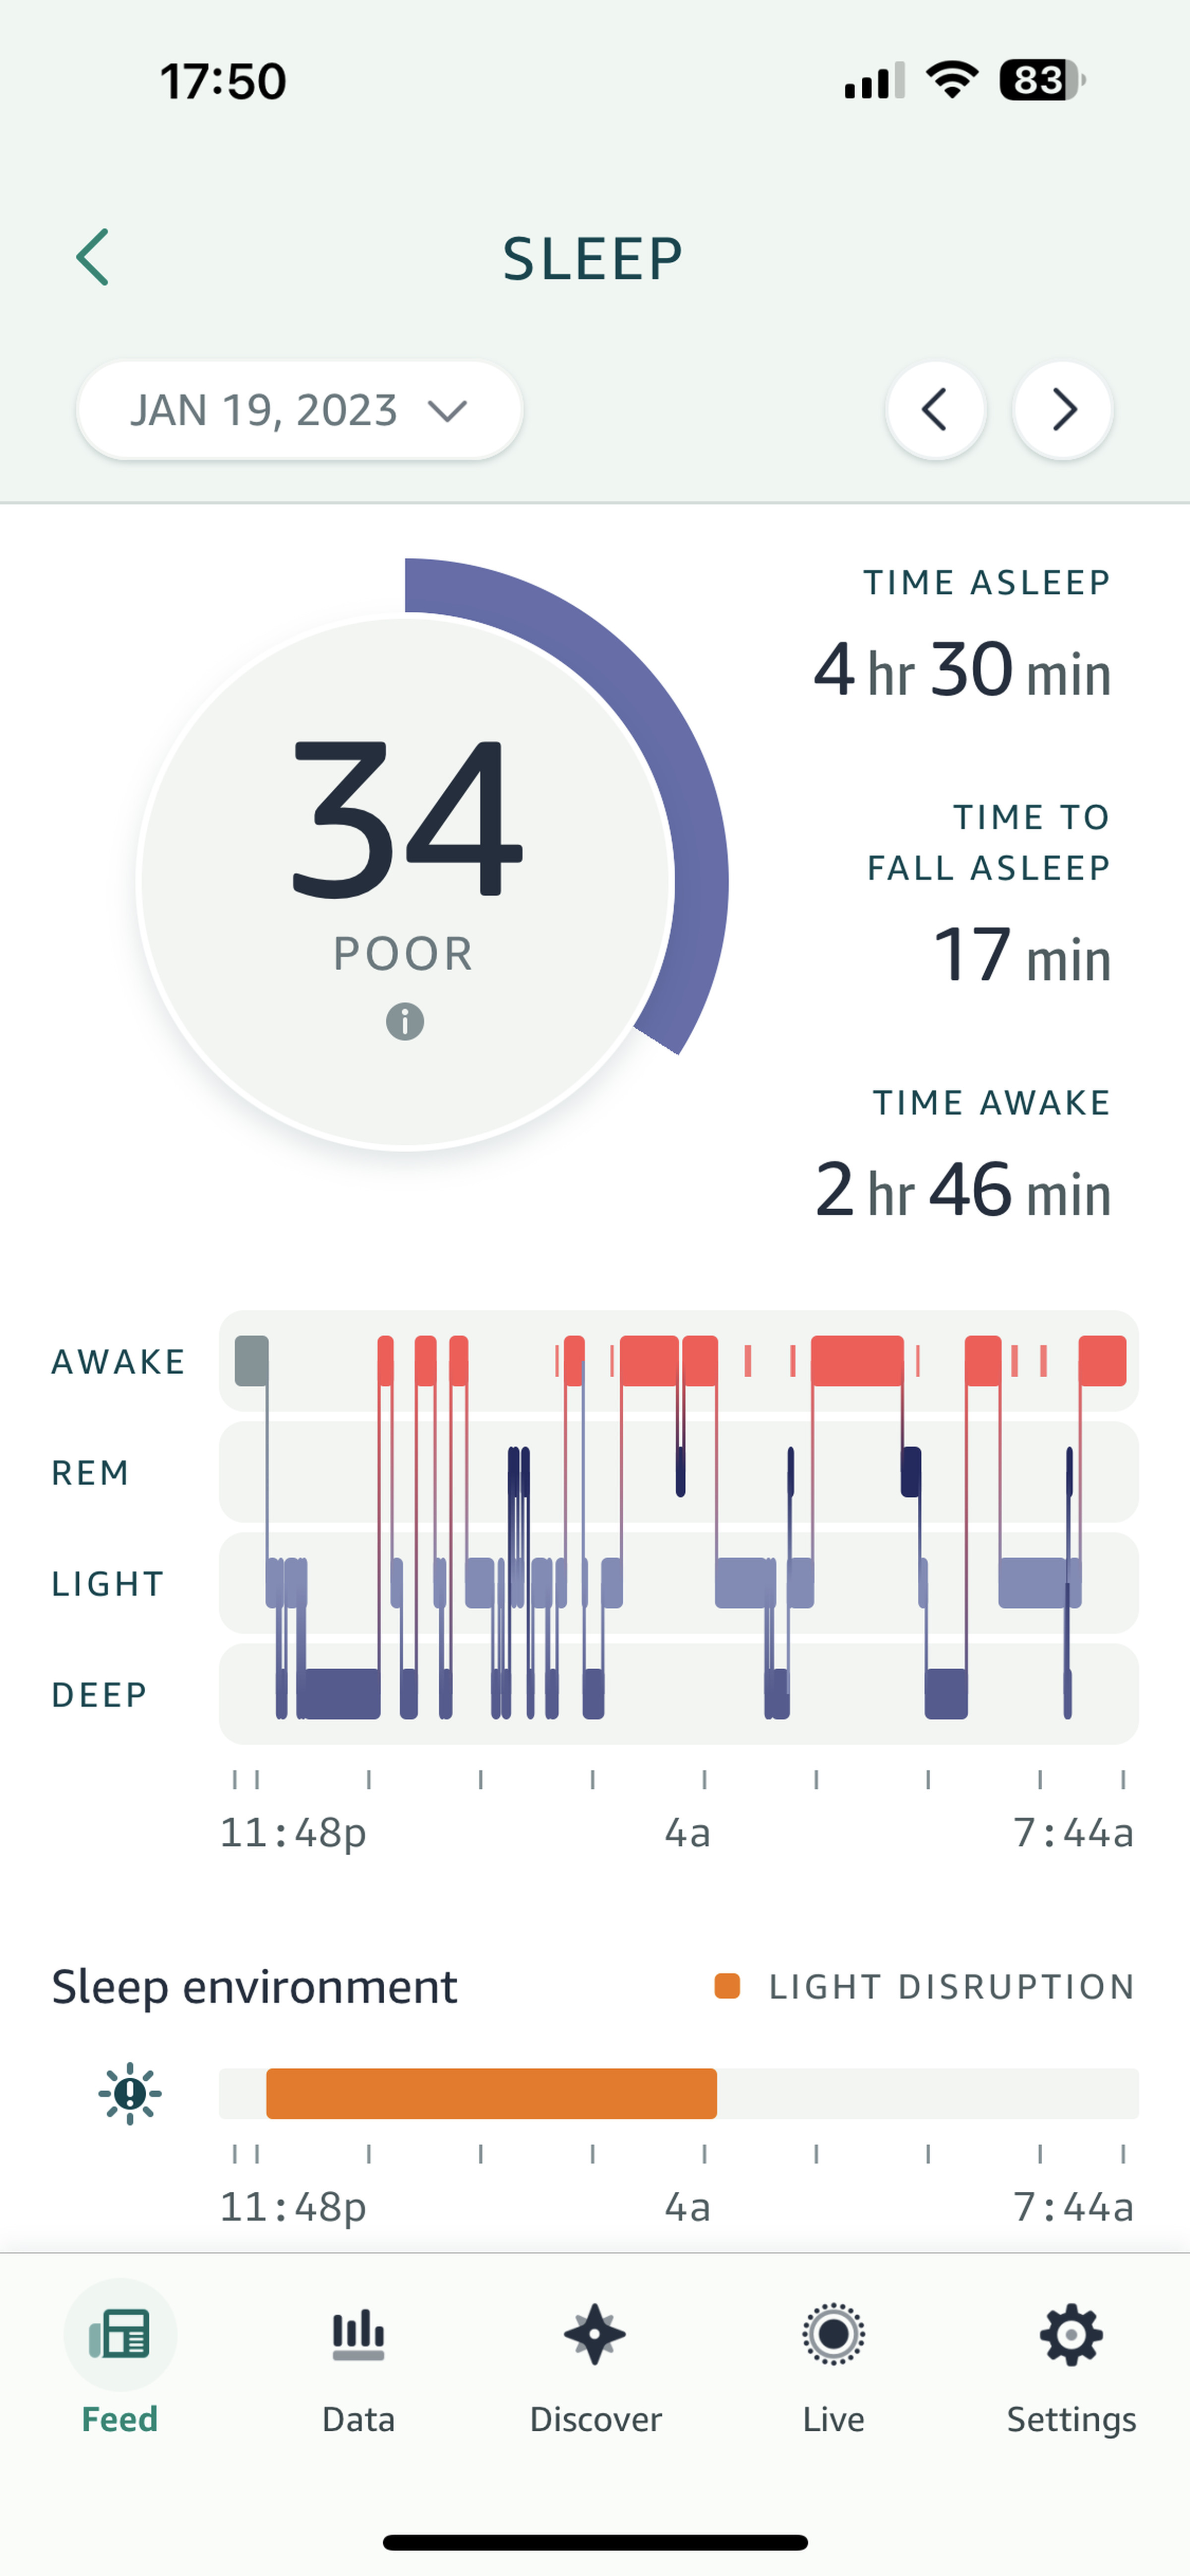 Amazon Halo app showing significant light disruption between 11:48PM and 7:44AM as well as 2 hours, 46 minutes of awake time.